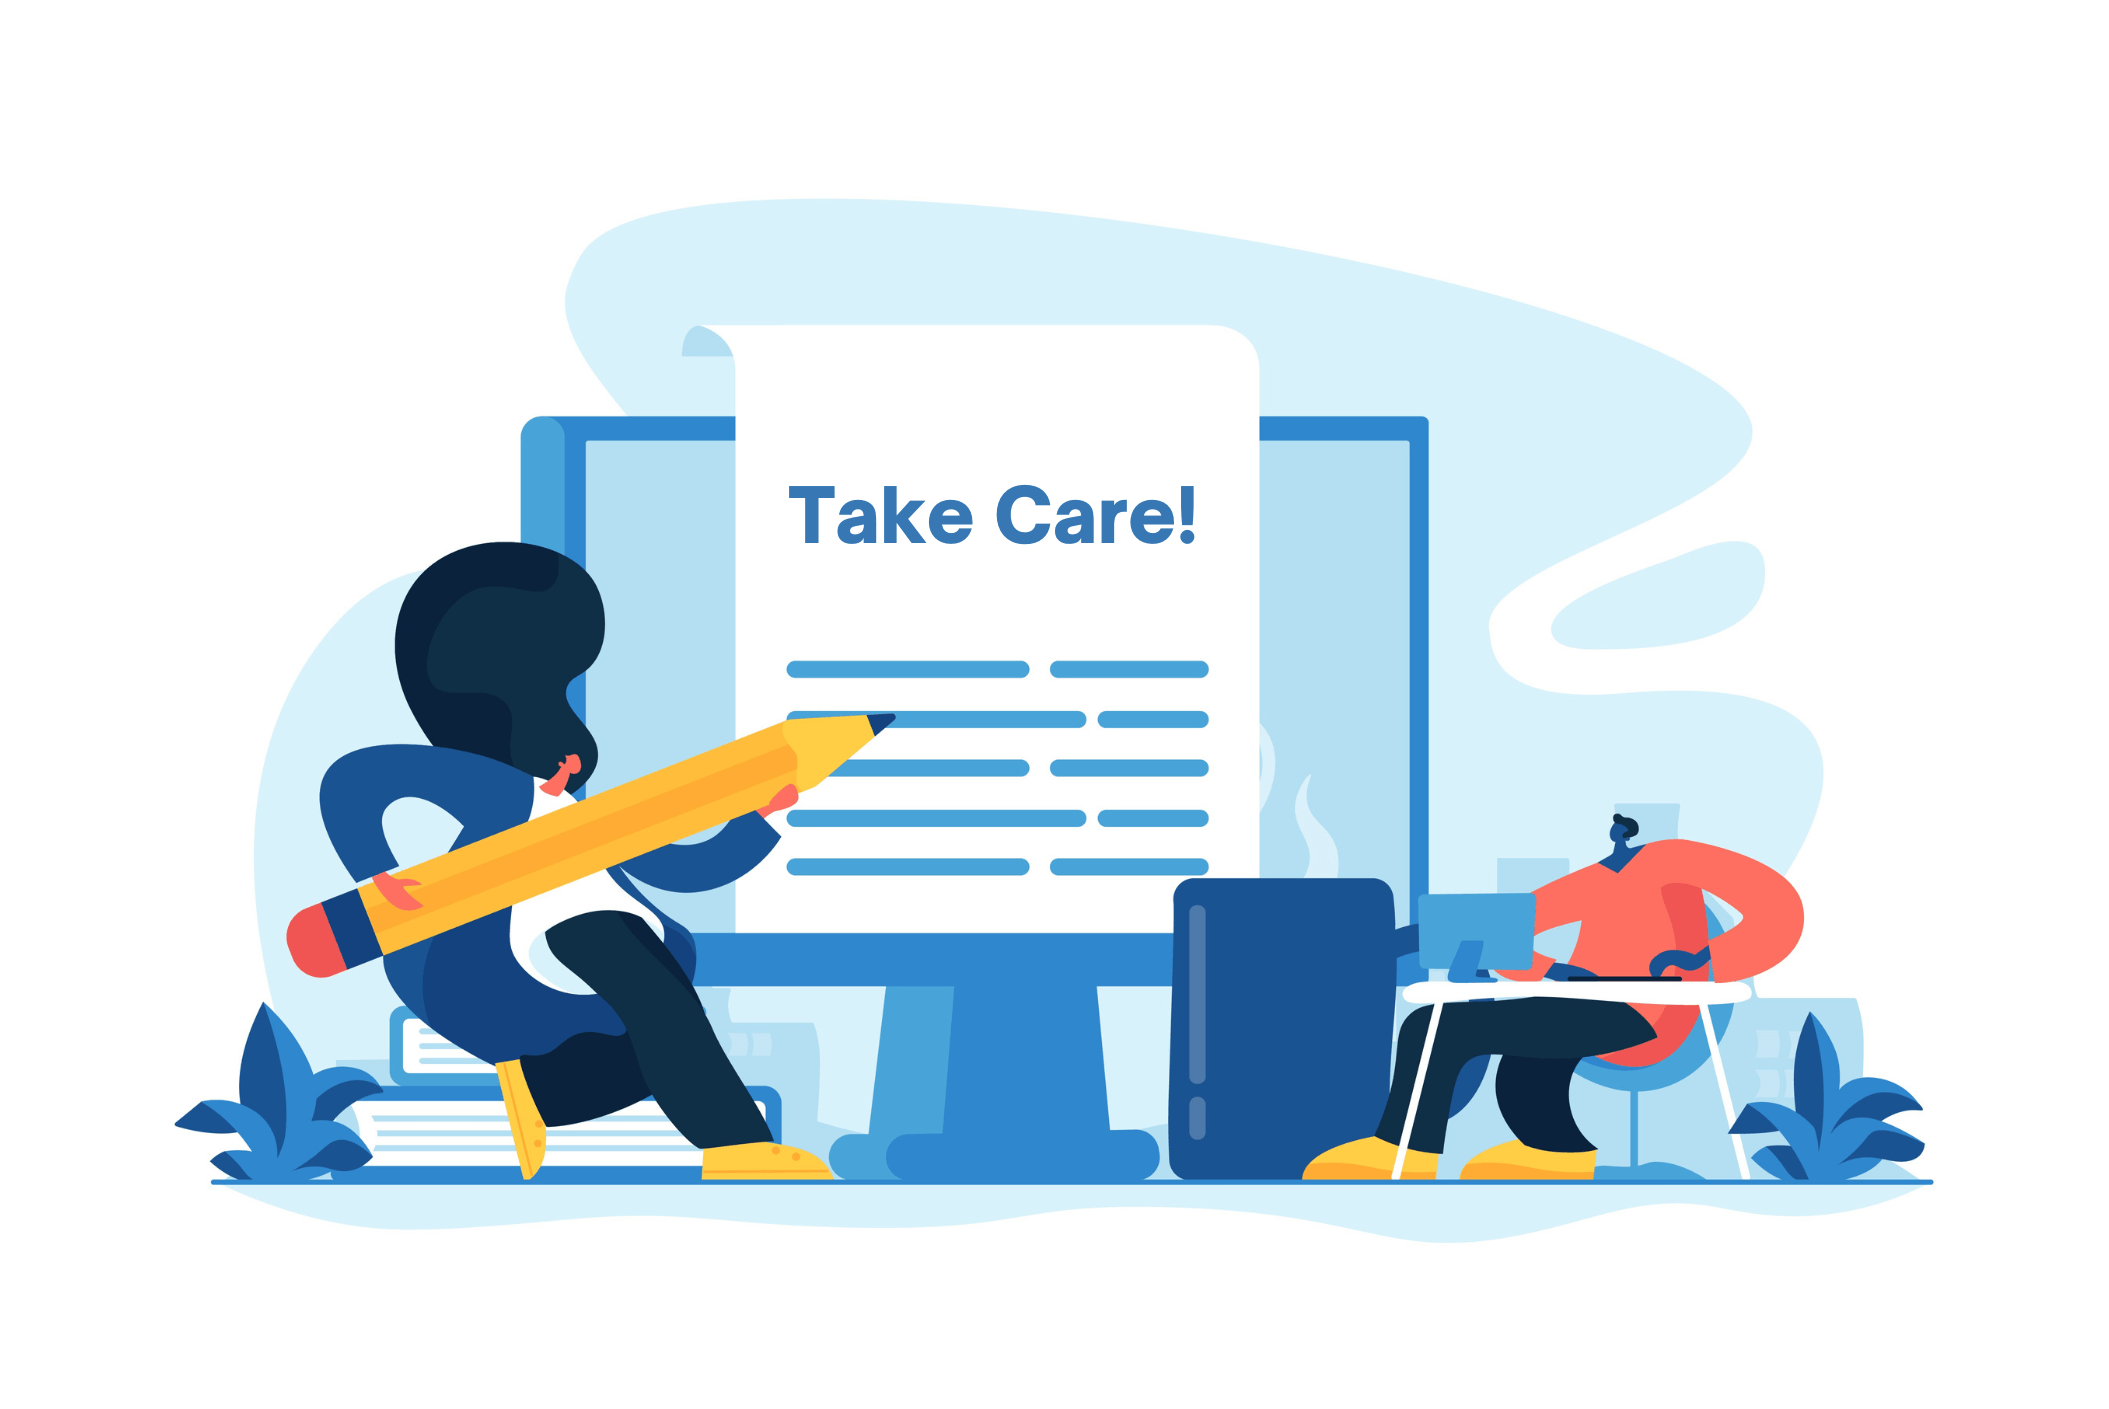 end-email-message-take-care